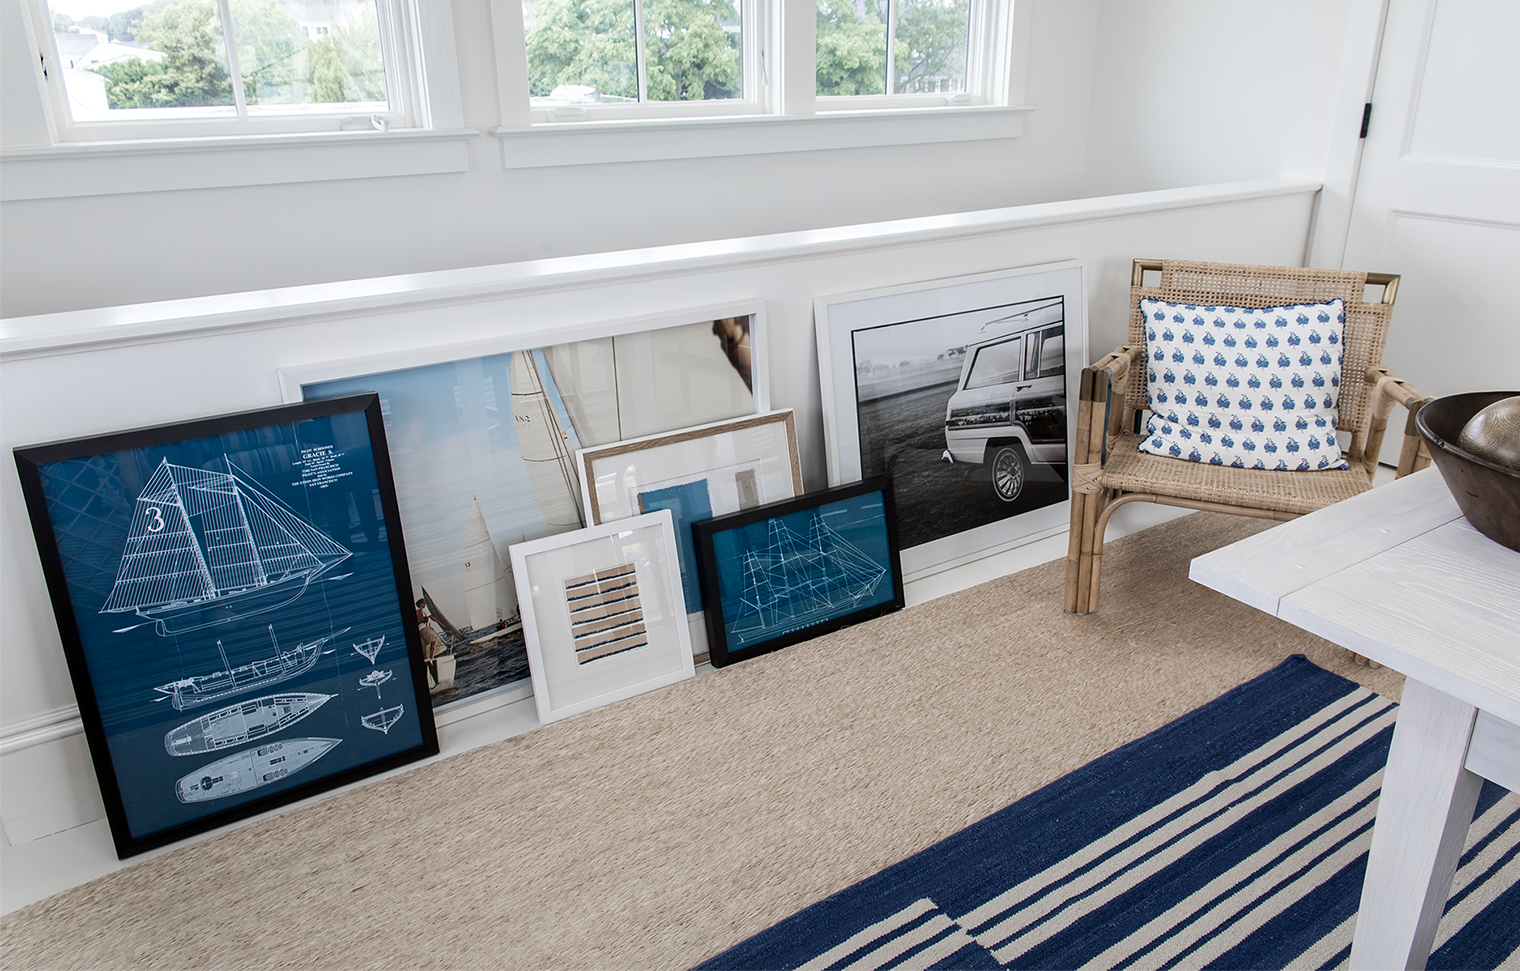 Decorating with blue and white